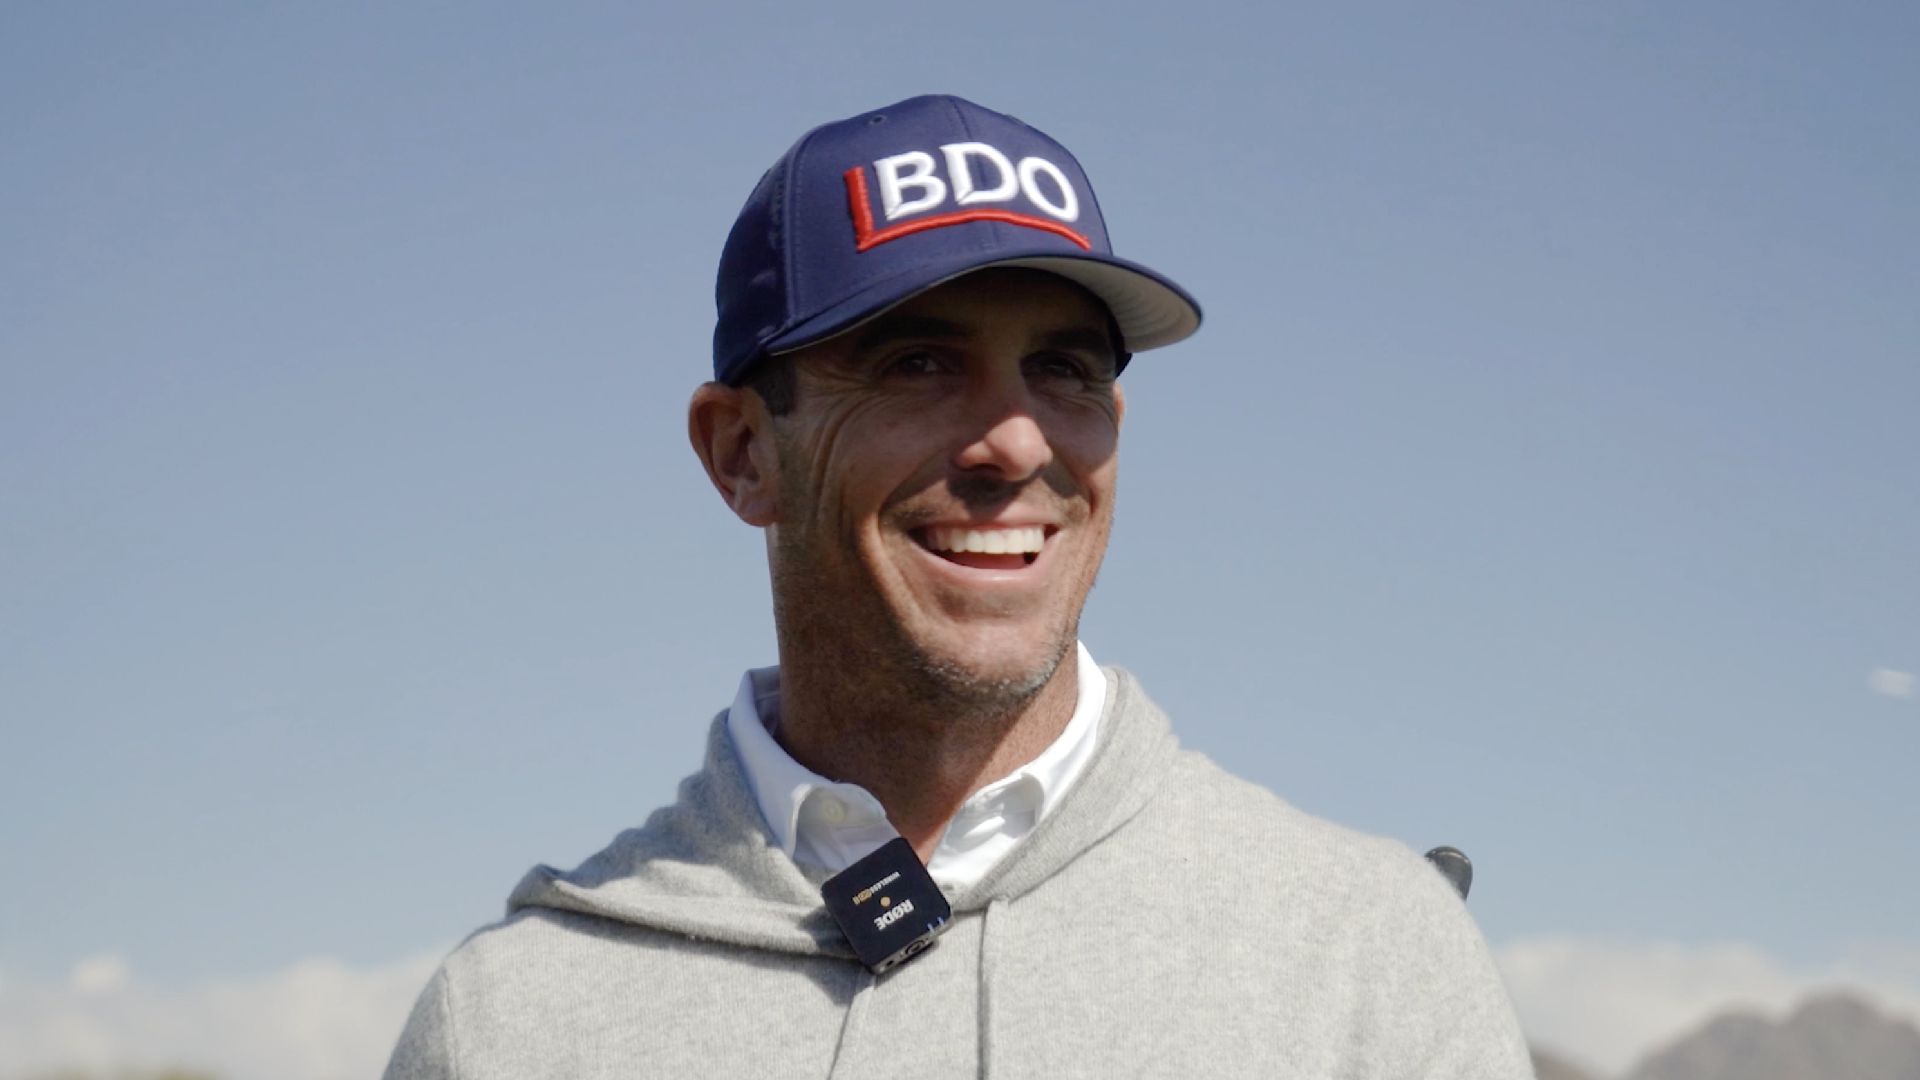 Billy Horschel says top pros are playing for more than just the money